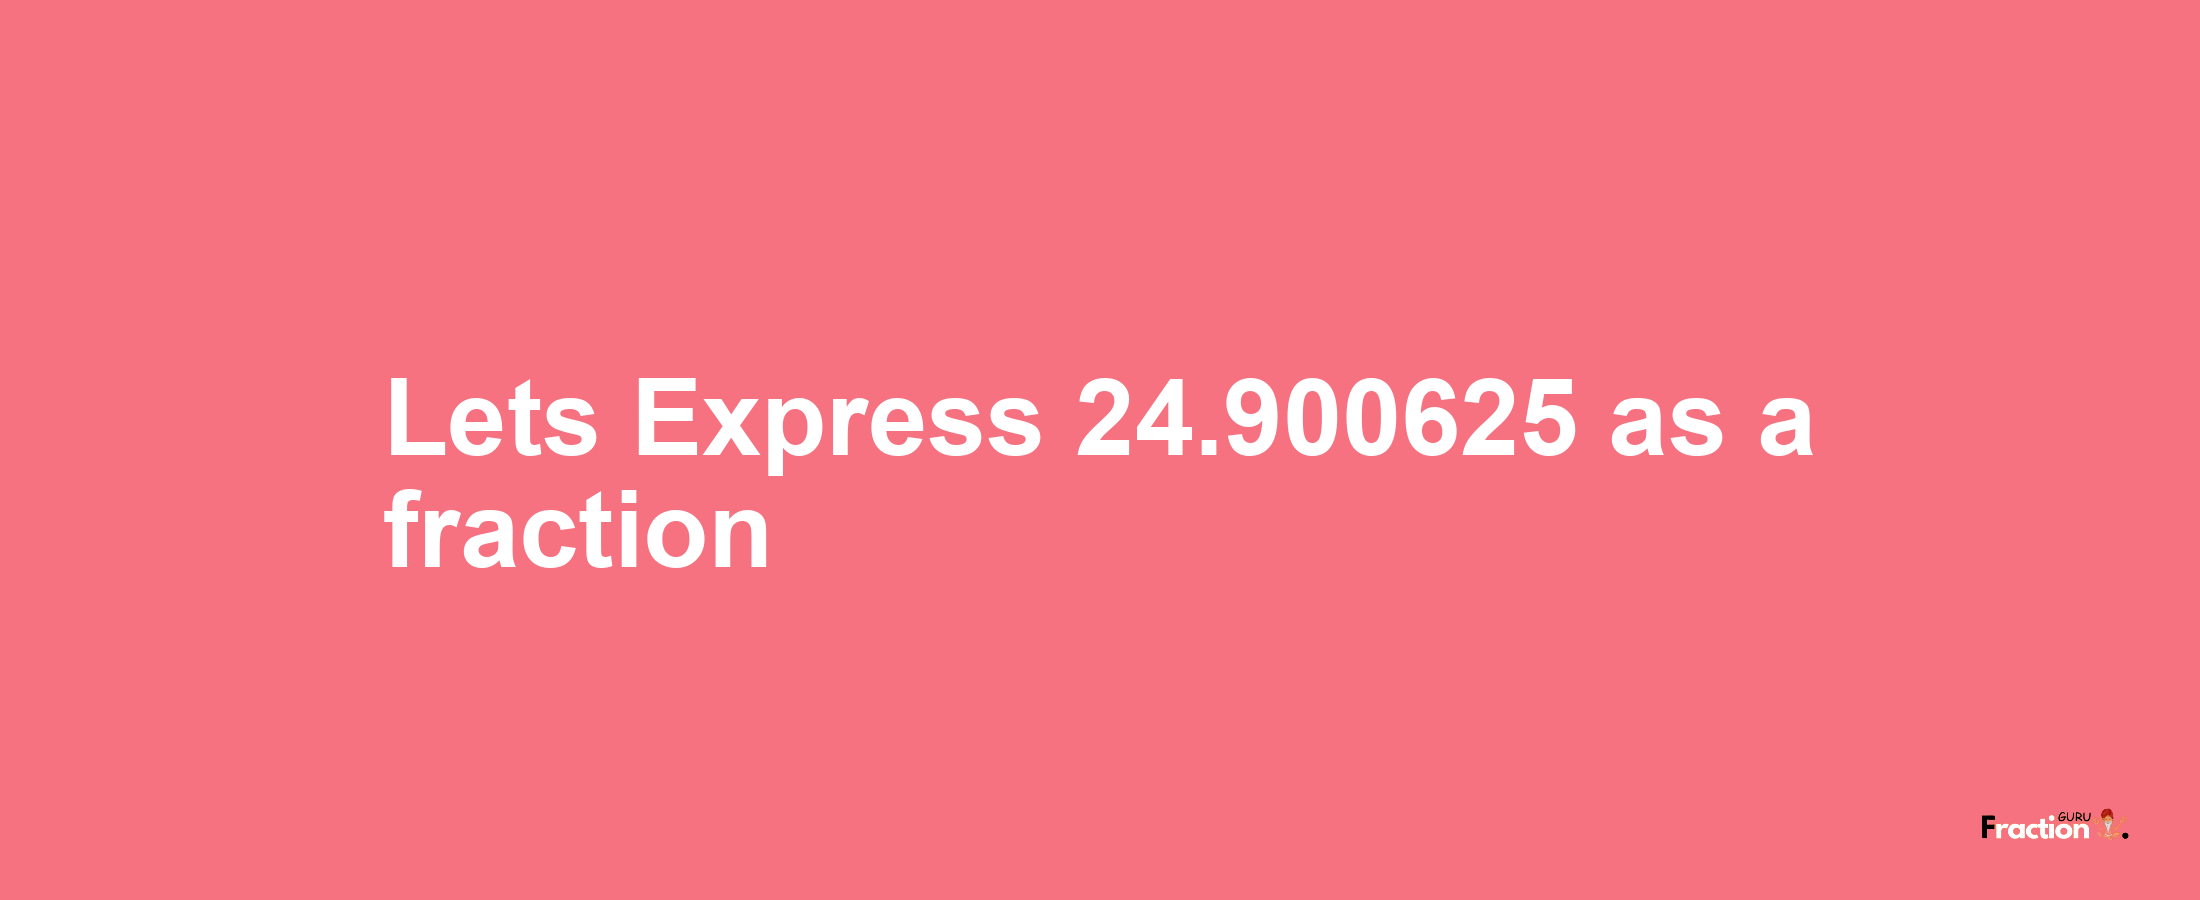 Lets Express 24.900625 as afraction